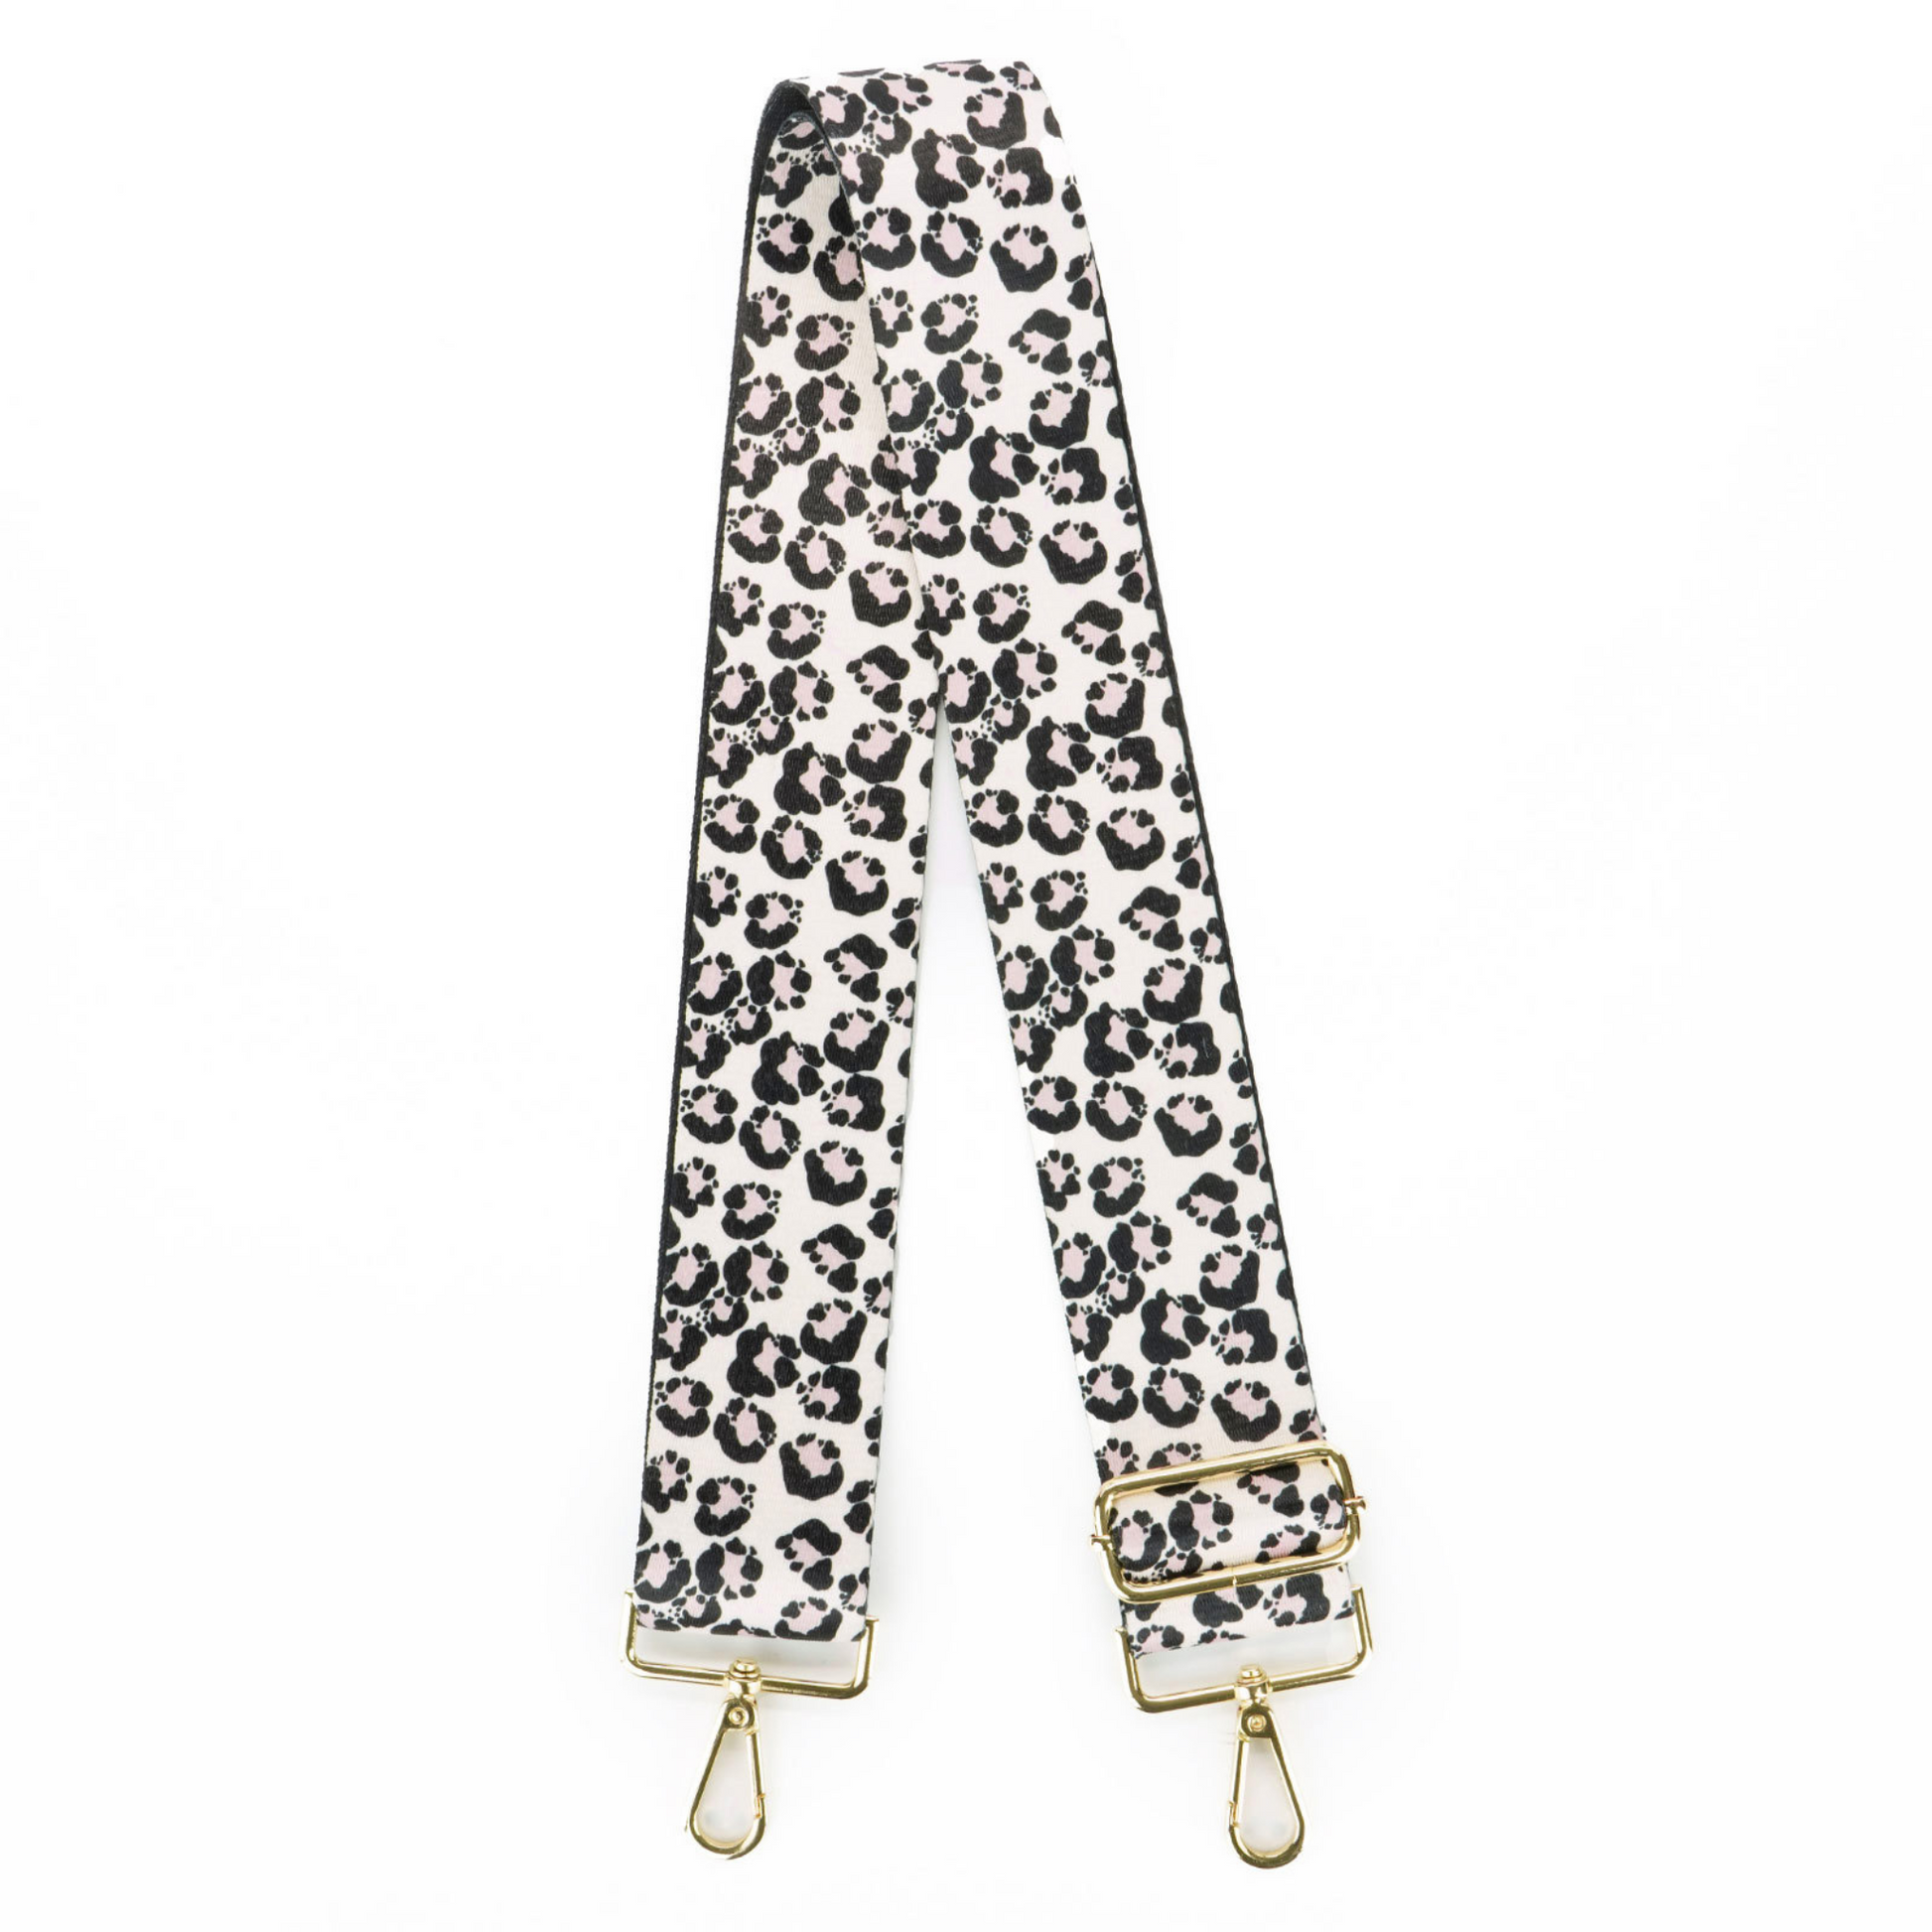 white and black leopard print purse strap with pink accents. Adjustable and interchangeable